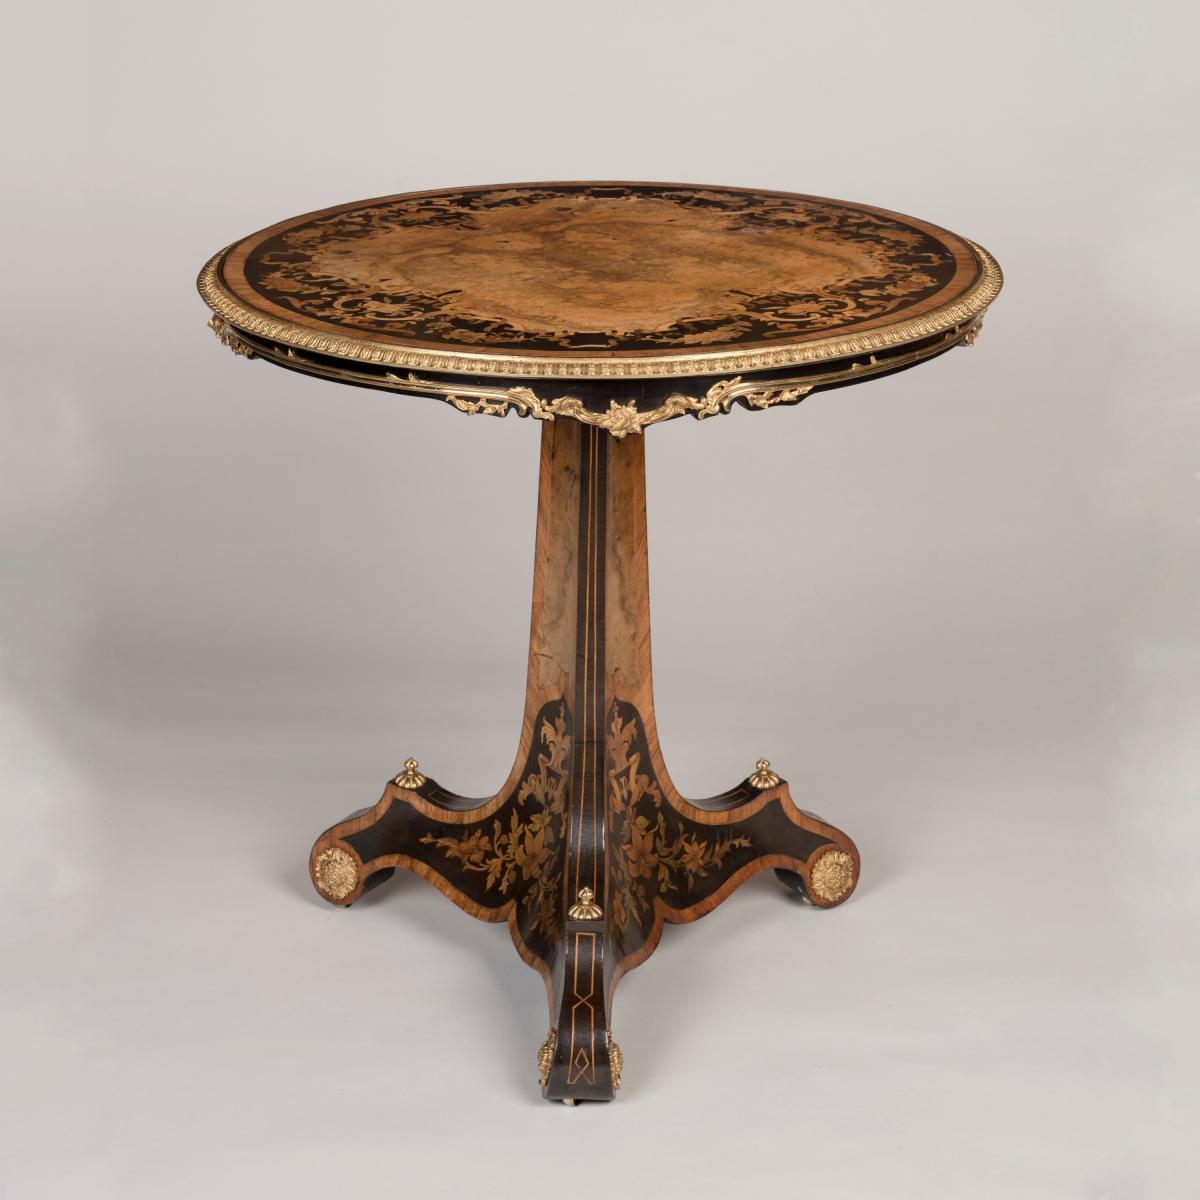 Marquetry Inlaid Table In the manner of Gillows